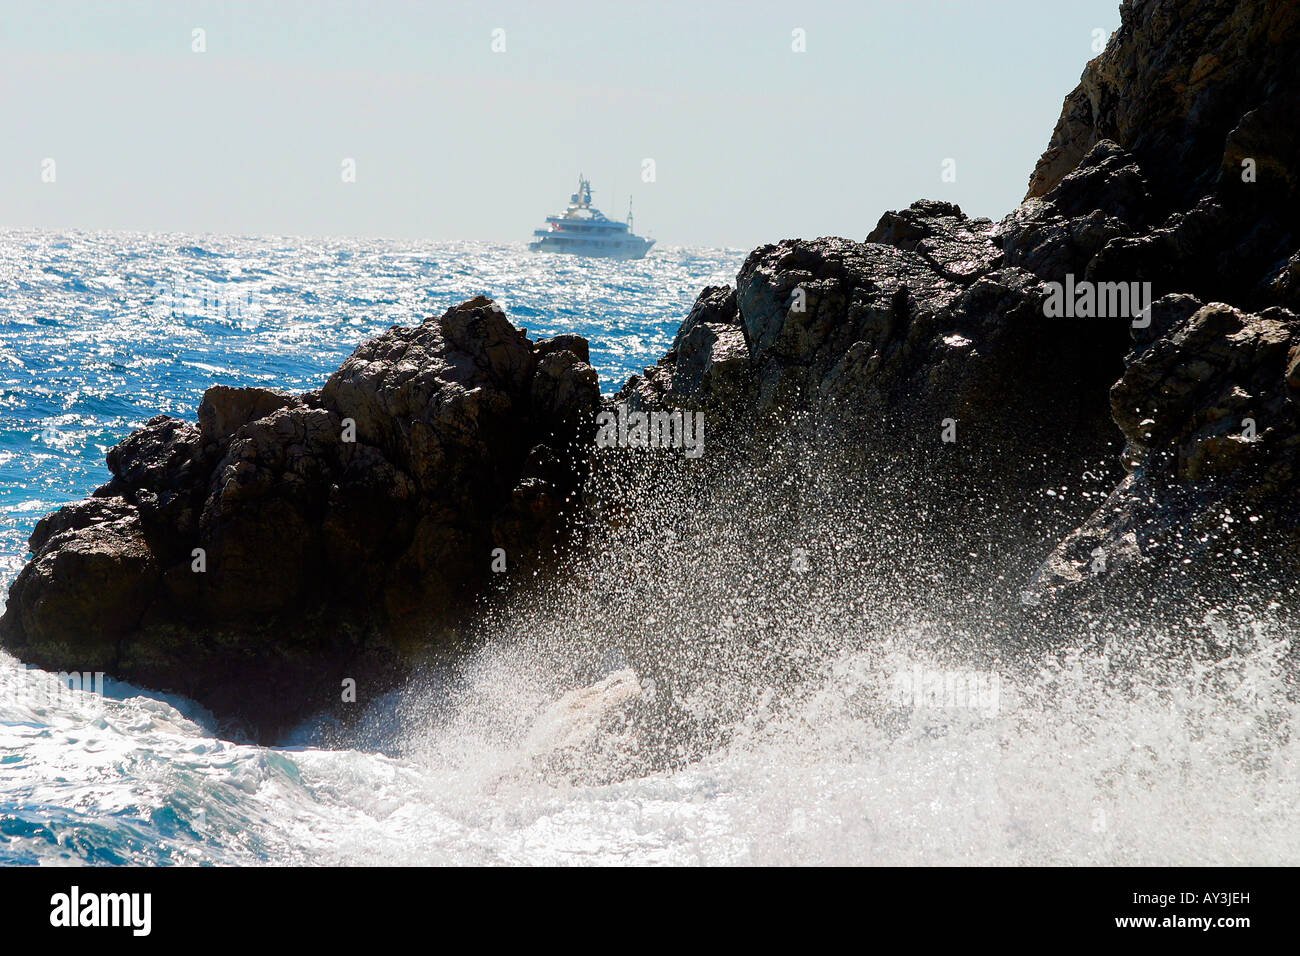 Waves crashing on rocks by shore, ship in background. Stock Photo